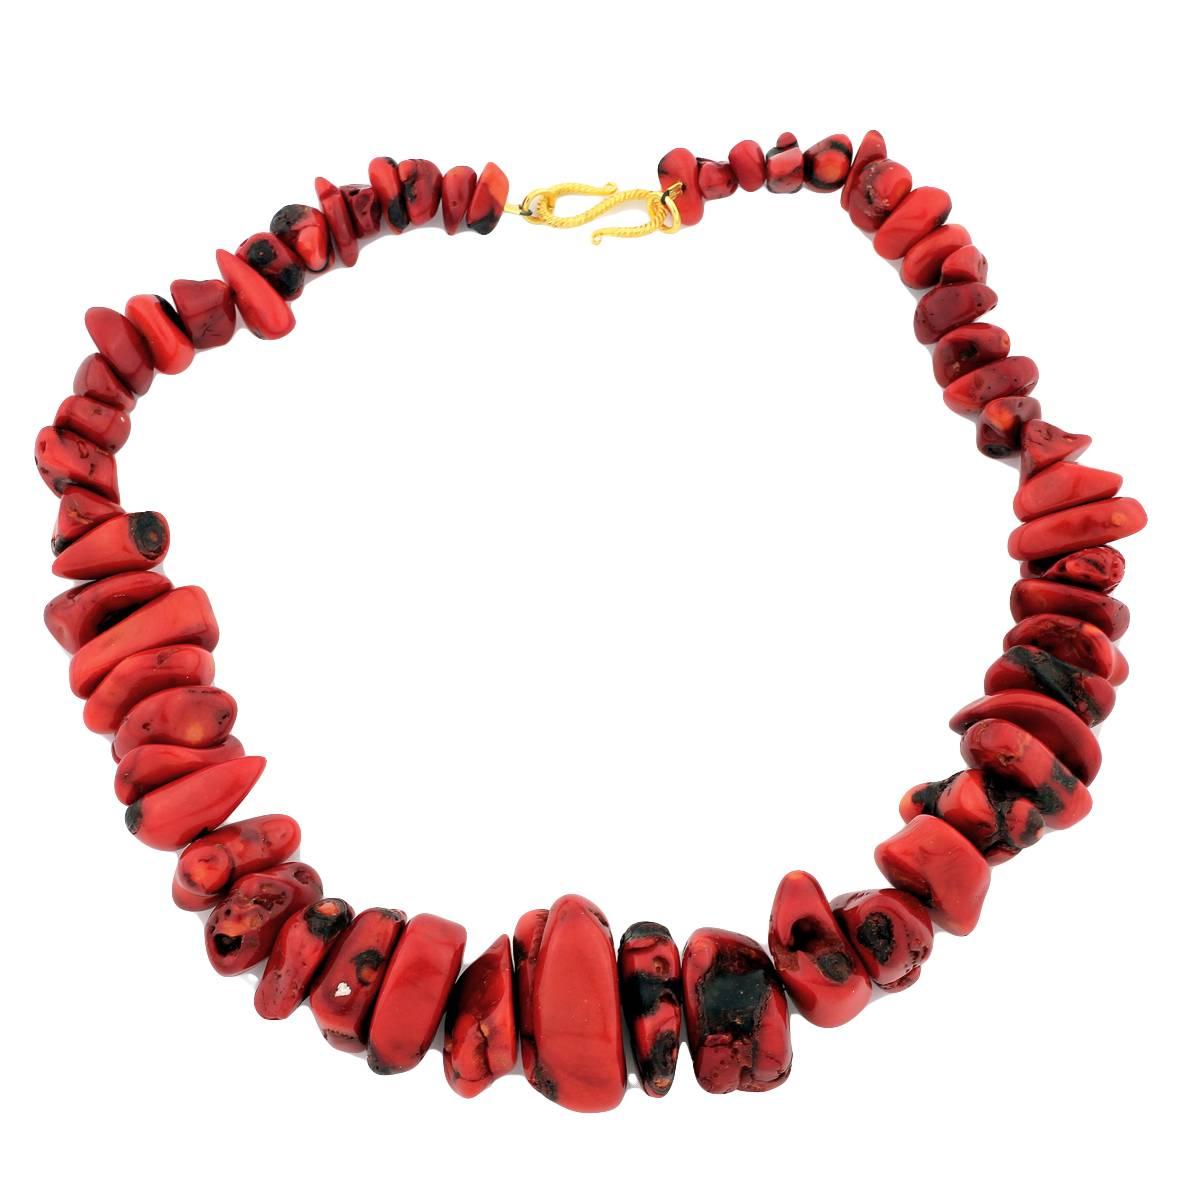  19 Inch Graduated Natural Red Coral Necklace